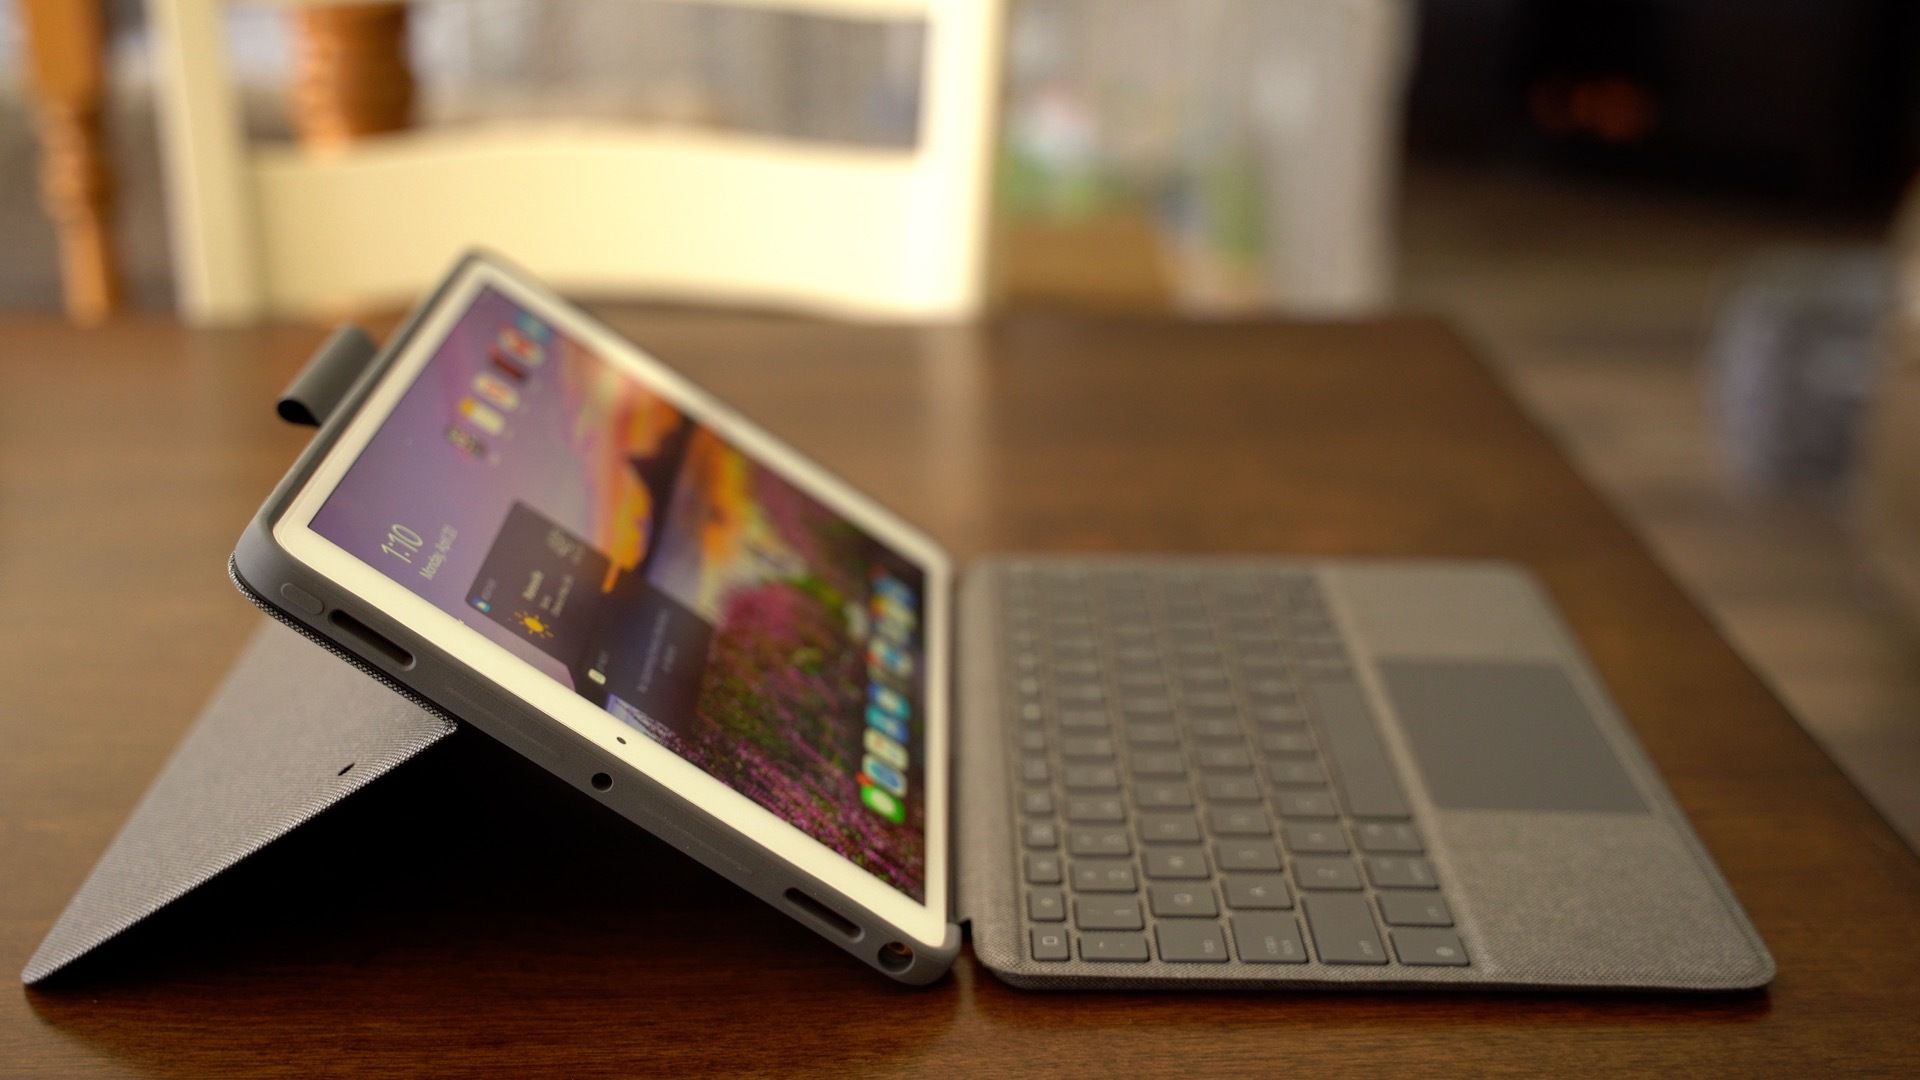 Hands-On With Logitech's New With Trackpad iPad Air [Updated] - MacRumors